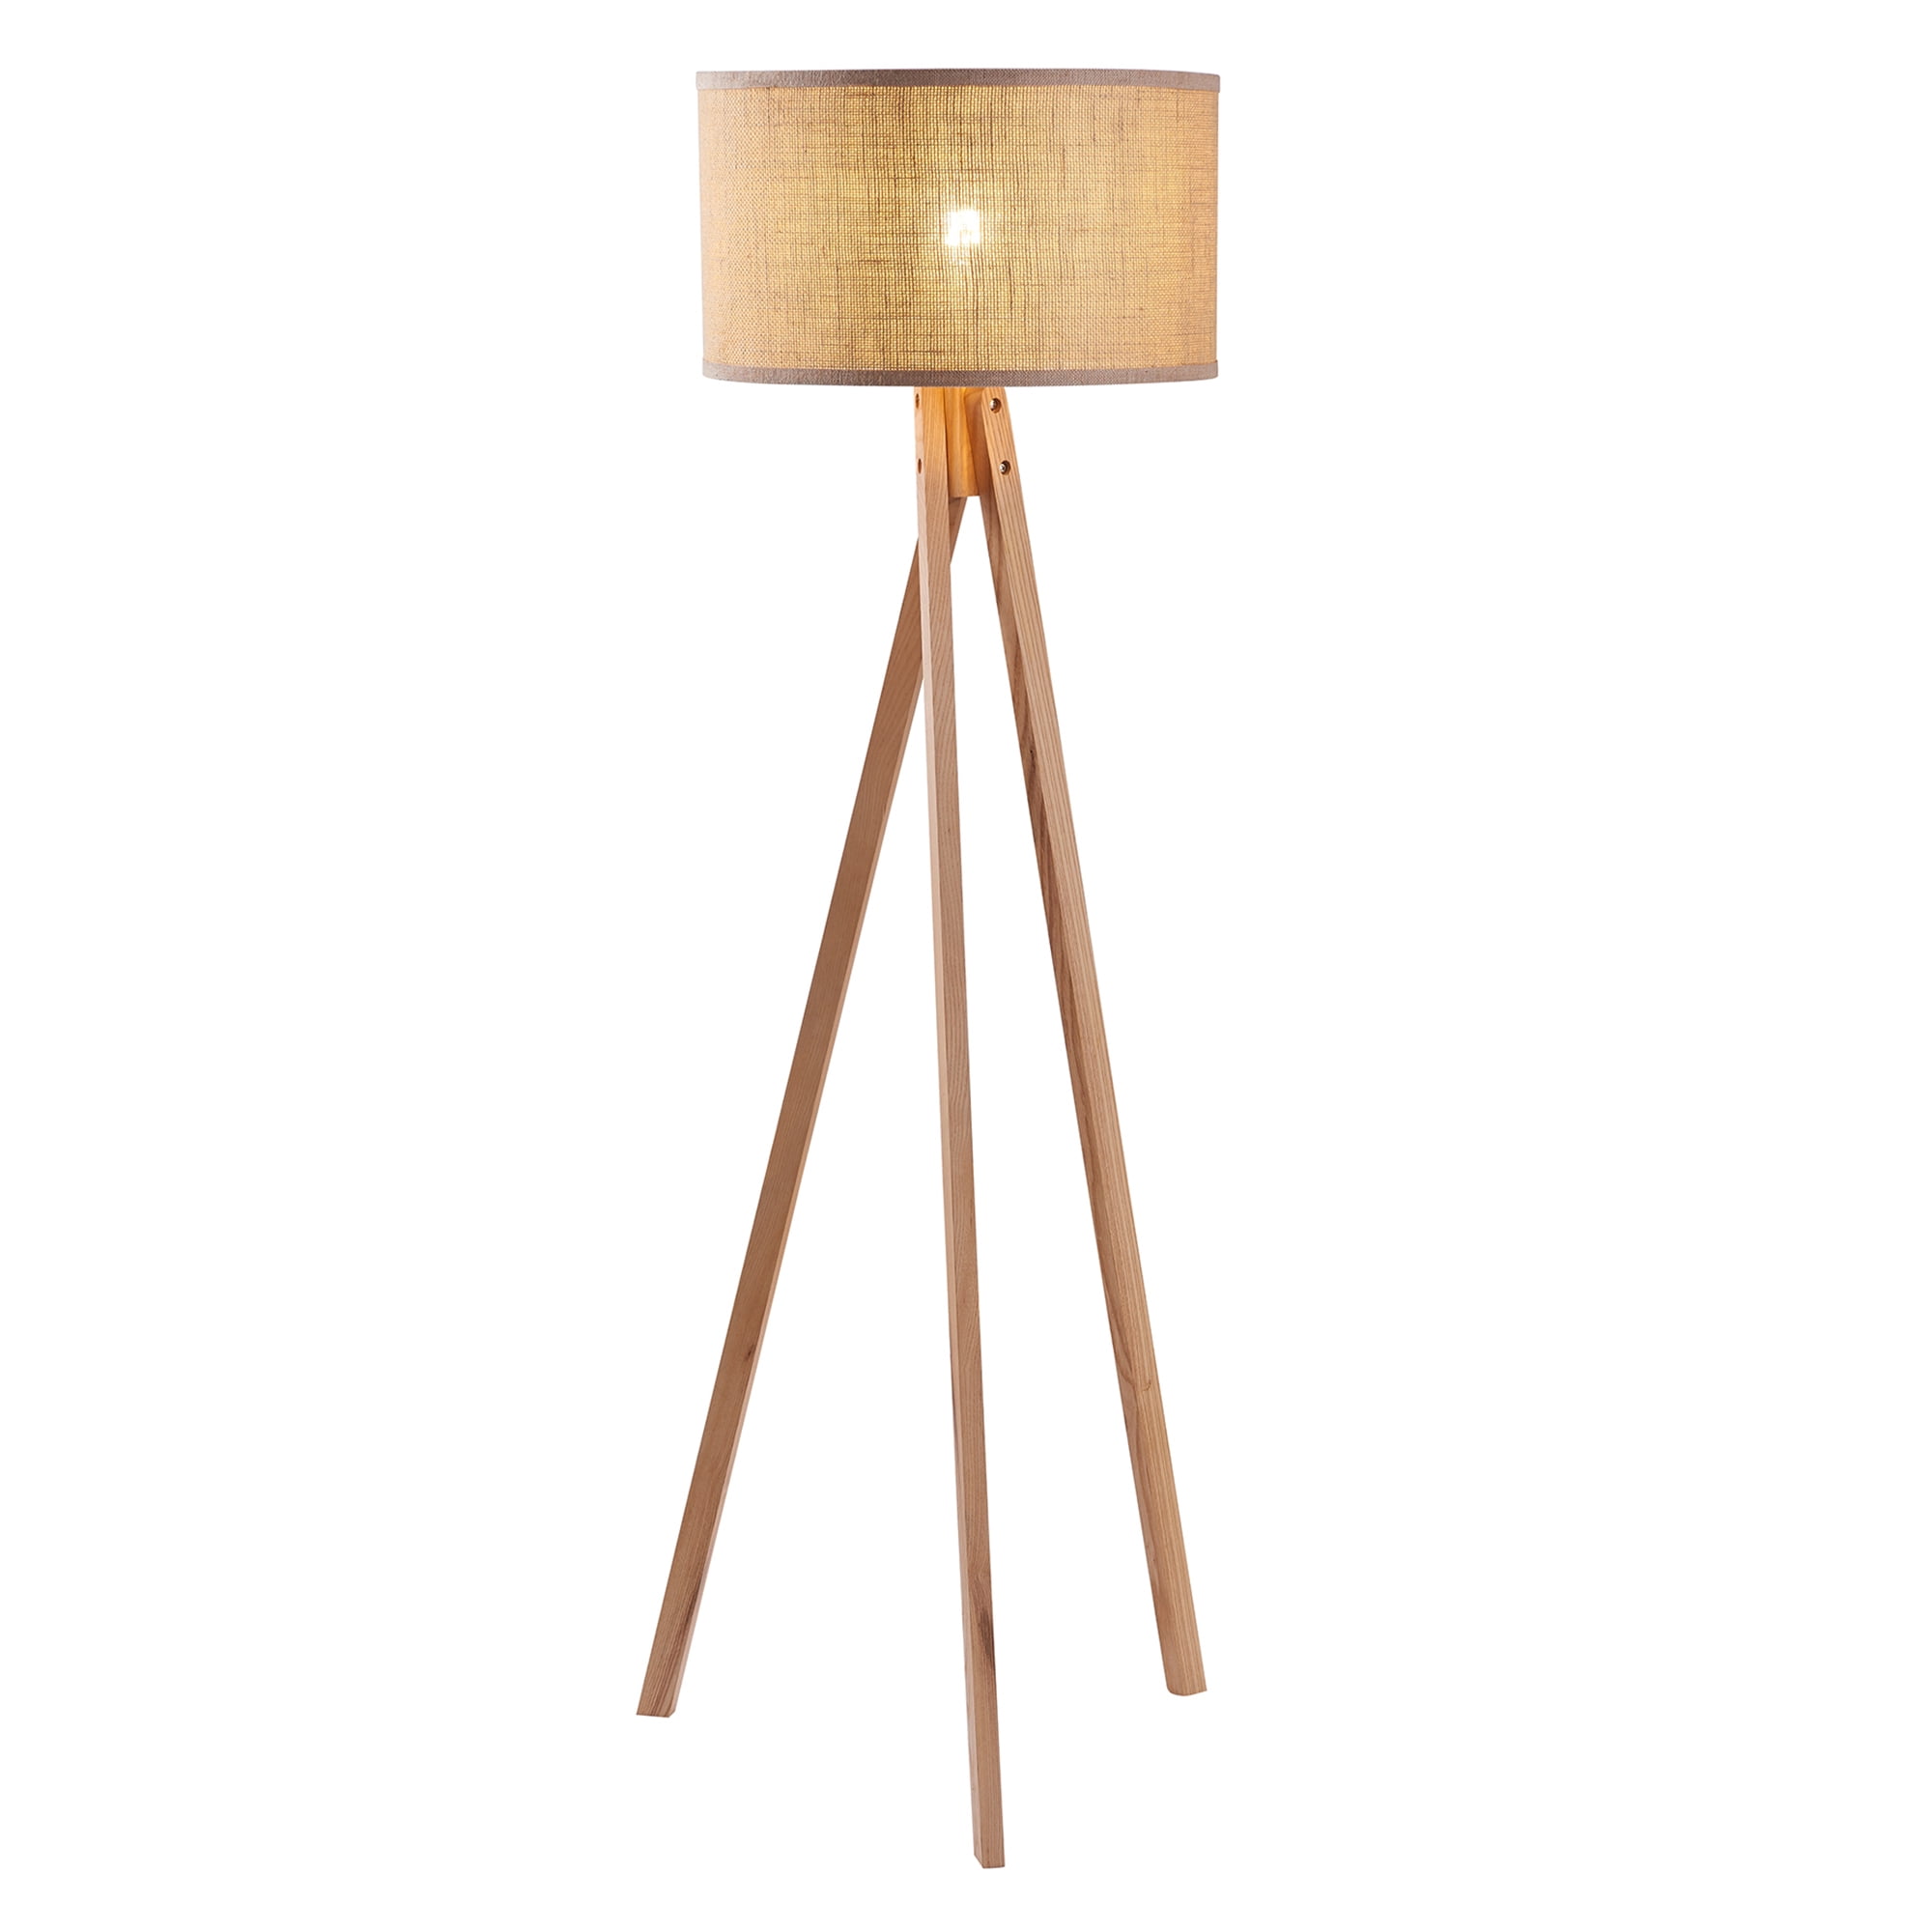 Versanora Hailey Wooden Tripod Floor Lamp with Solid Wood Finish and